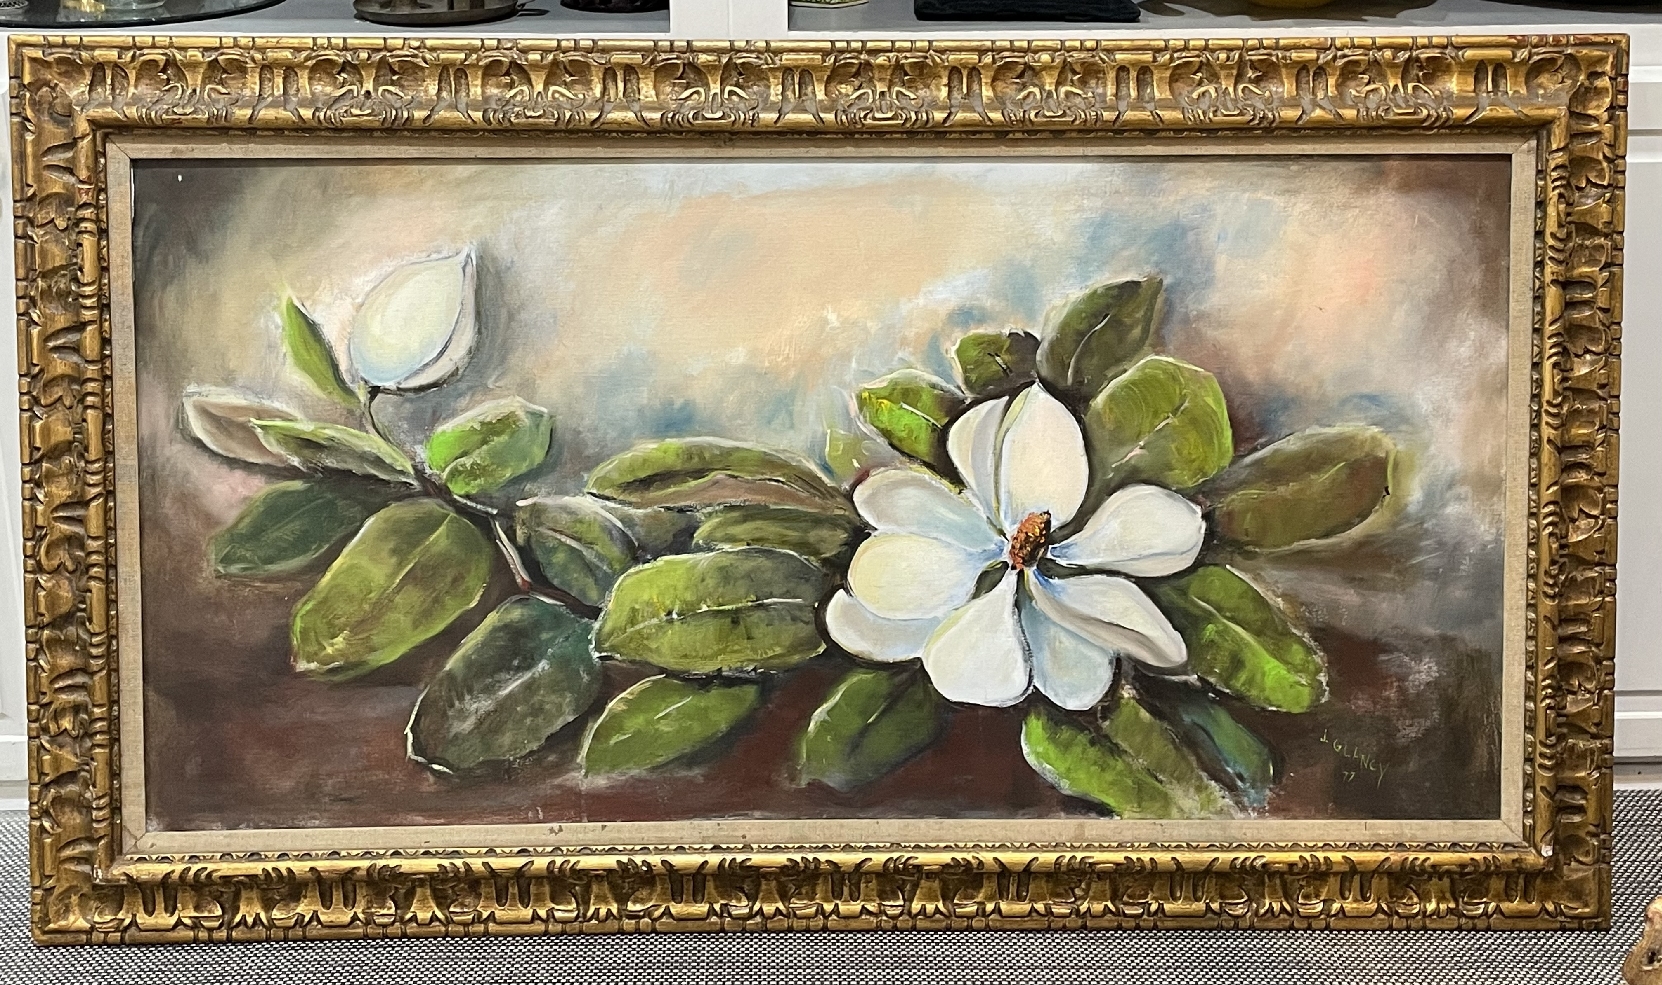 Framed Painting of Magnolia Leaves and Flowers
J. Glancey 77
32  x56  